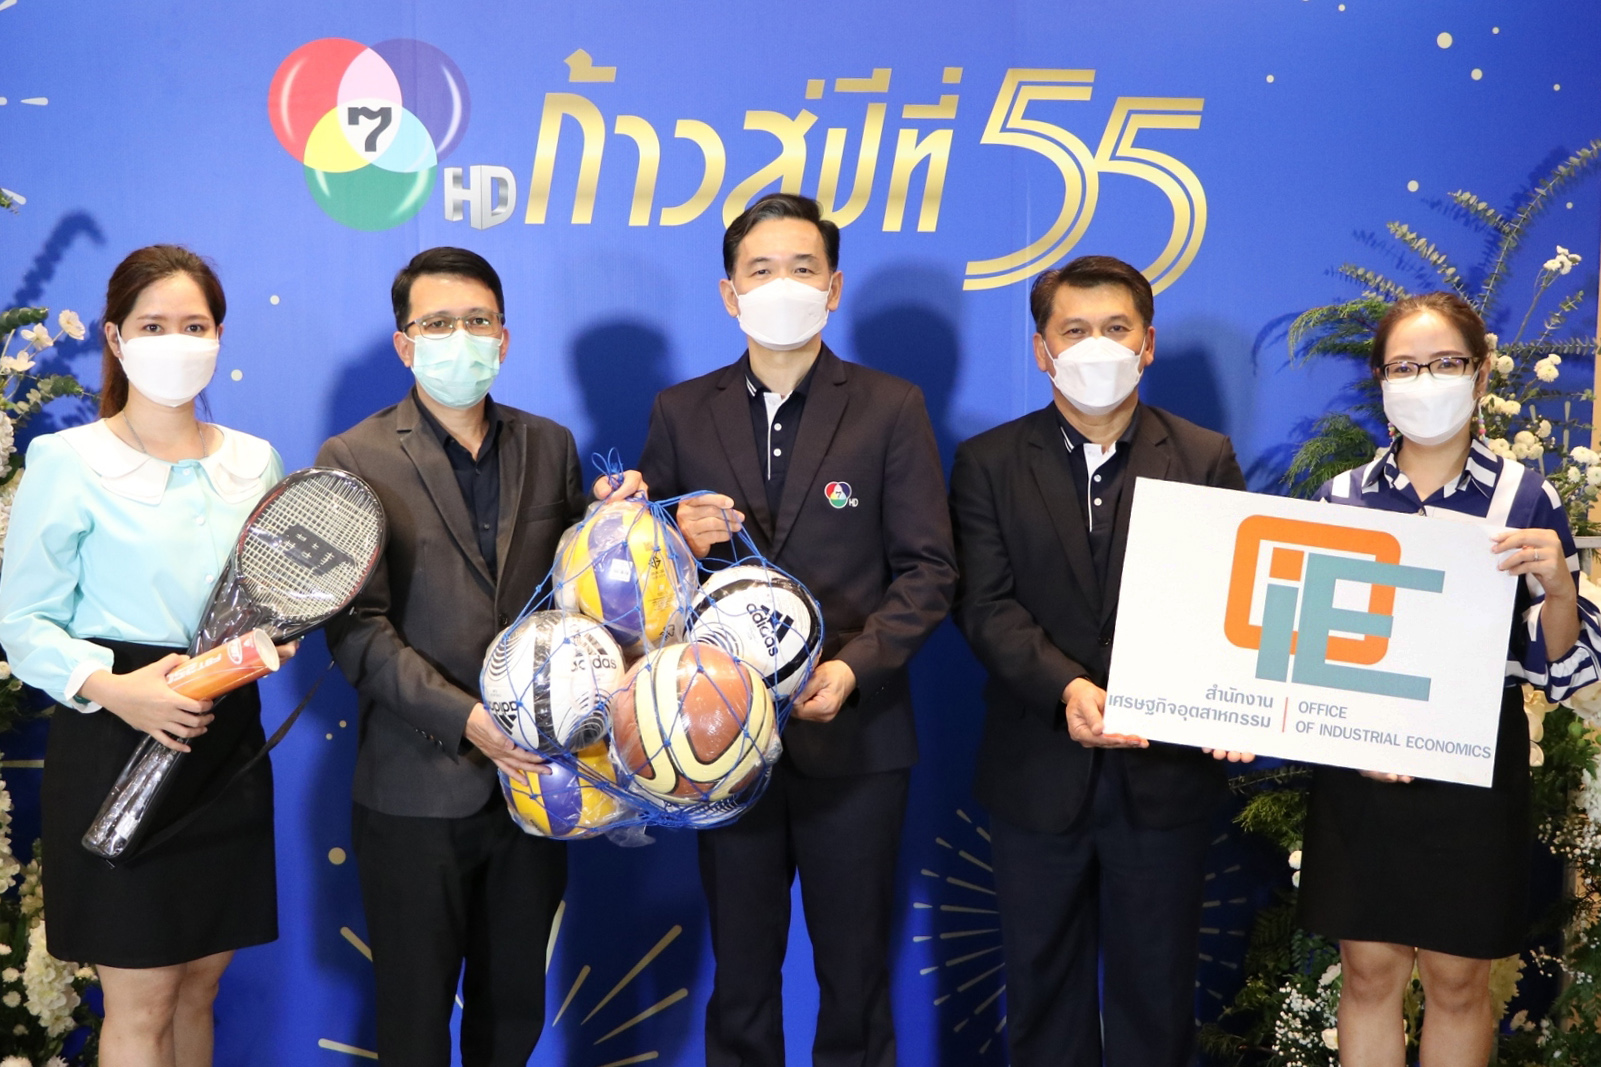 OIE Congratulates and Donates Sports Equipment to the Royal Thai Army Television Station, Channel 7, as It enters 55th year.